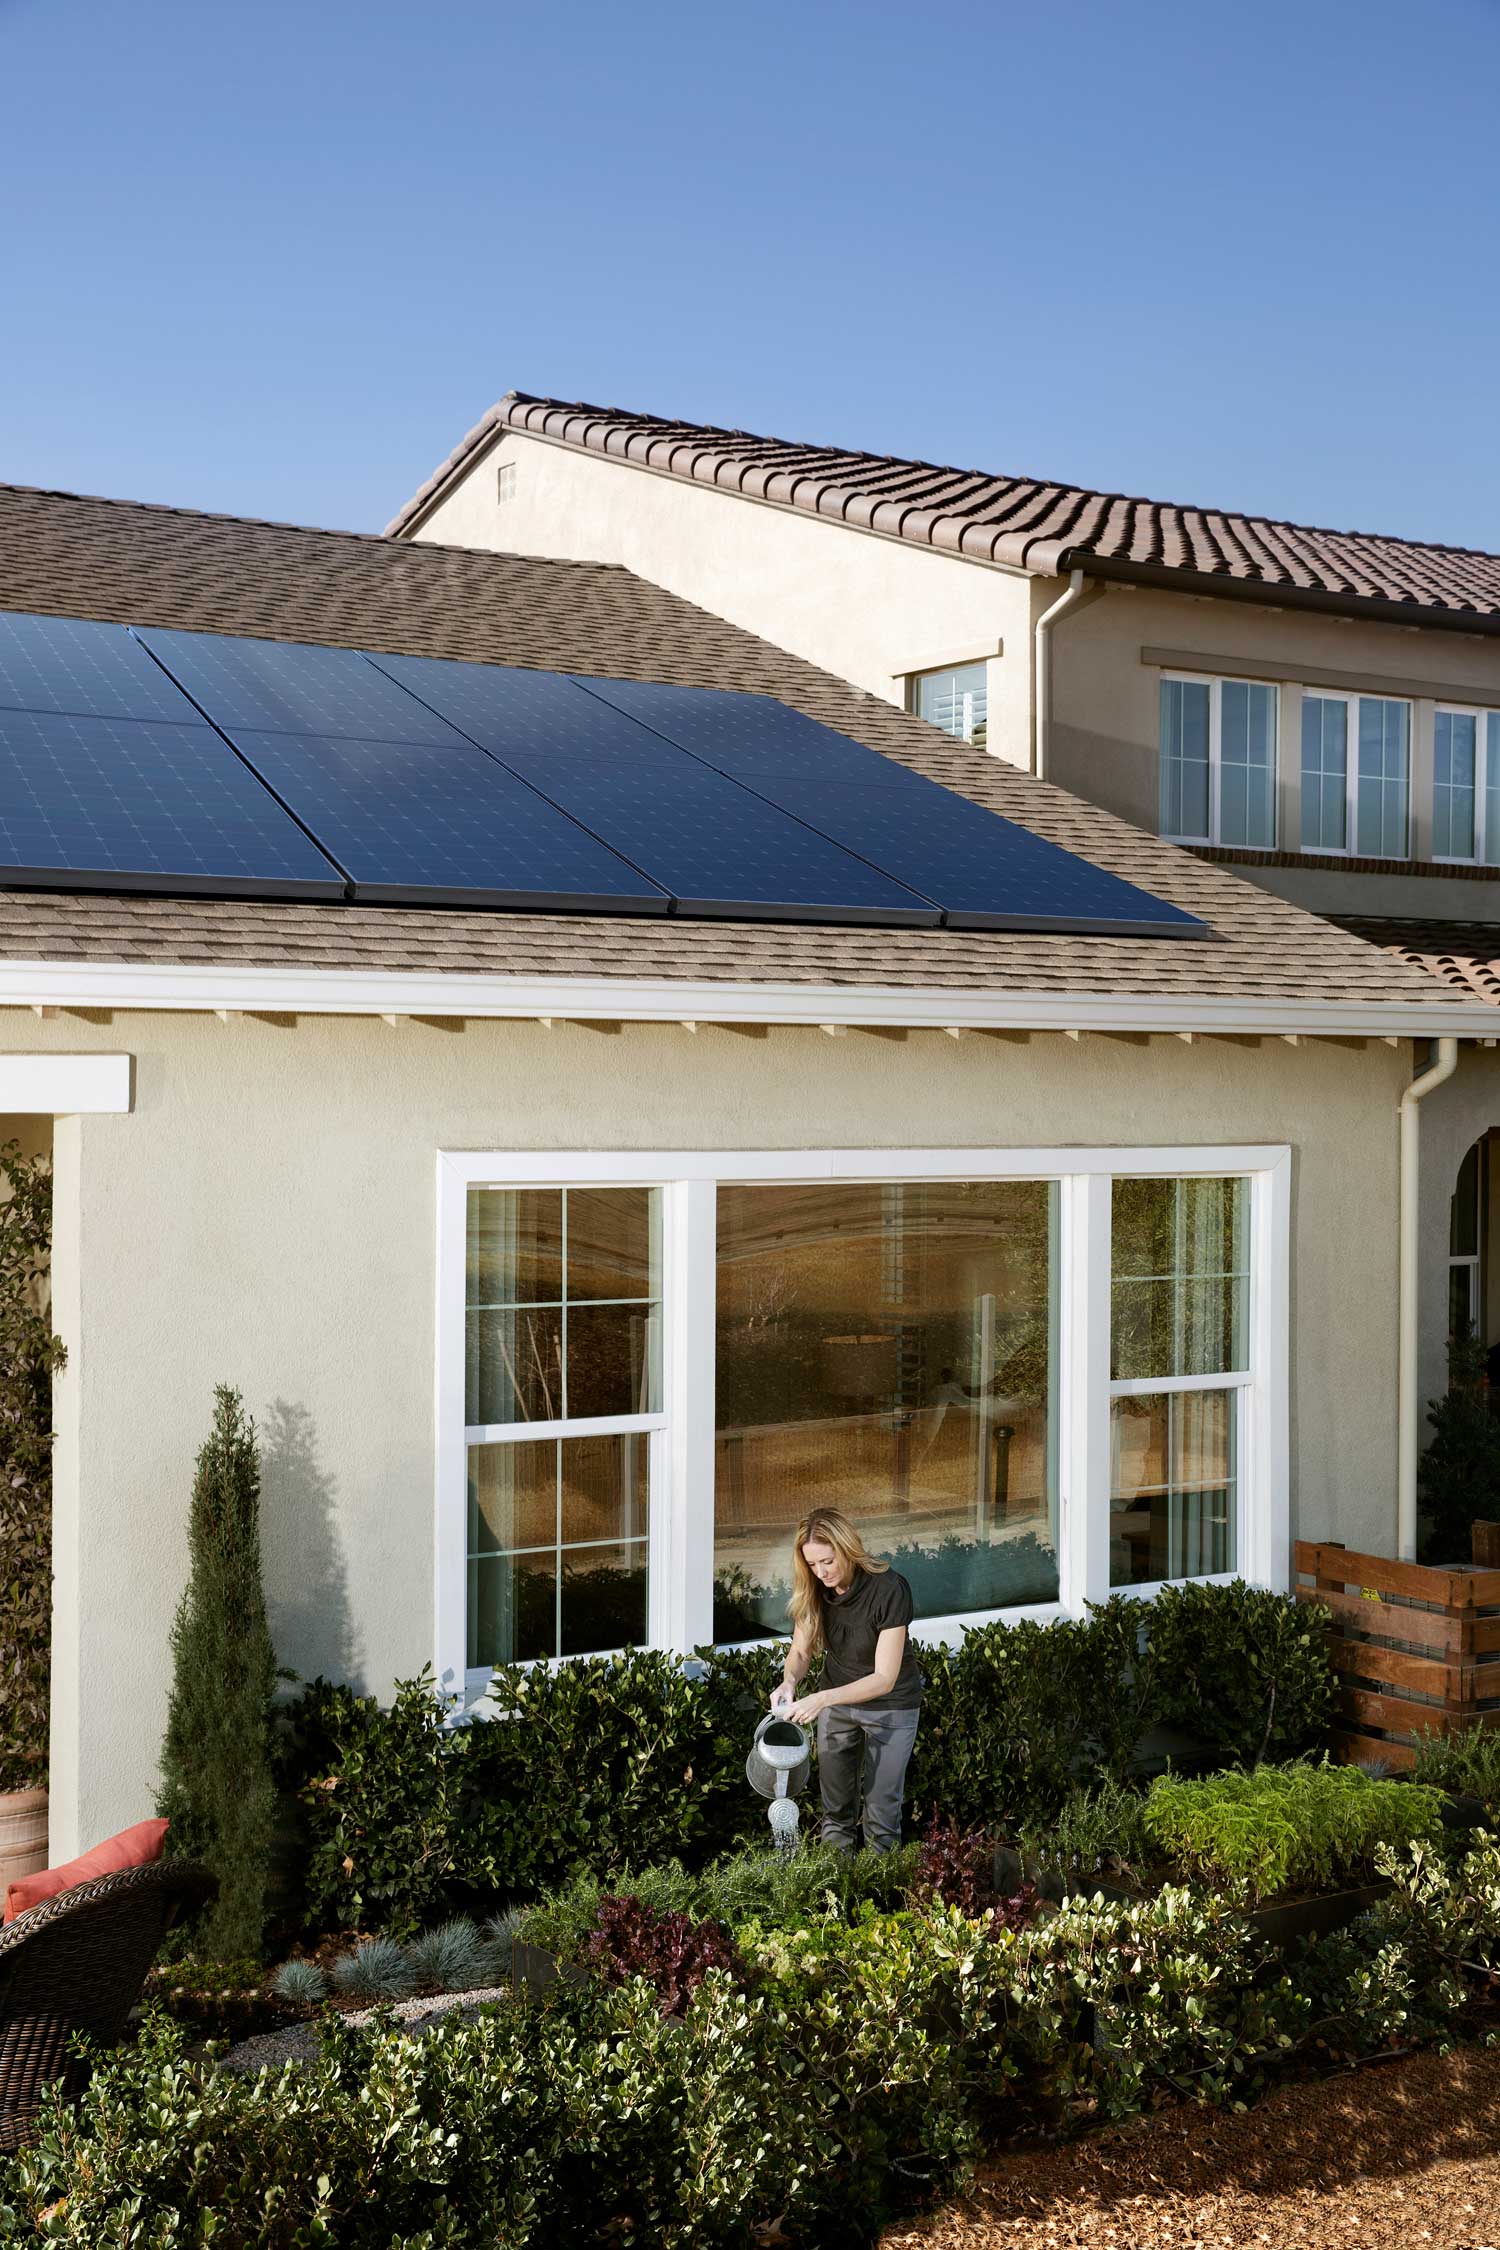 How can solar energy be used in a beautiful home like this? SunPower by Custom Energy shares ideas.